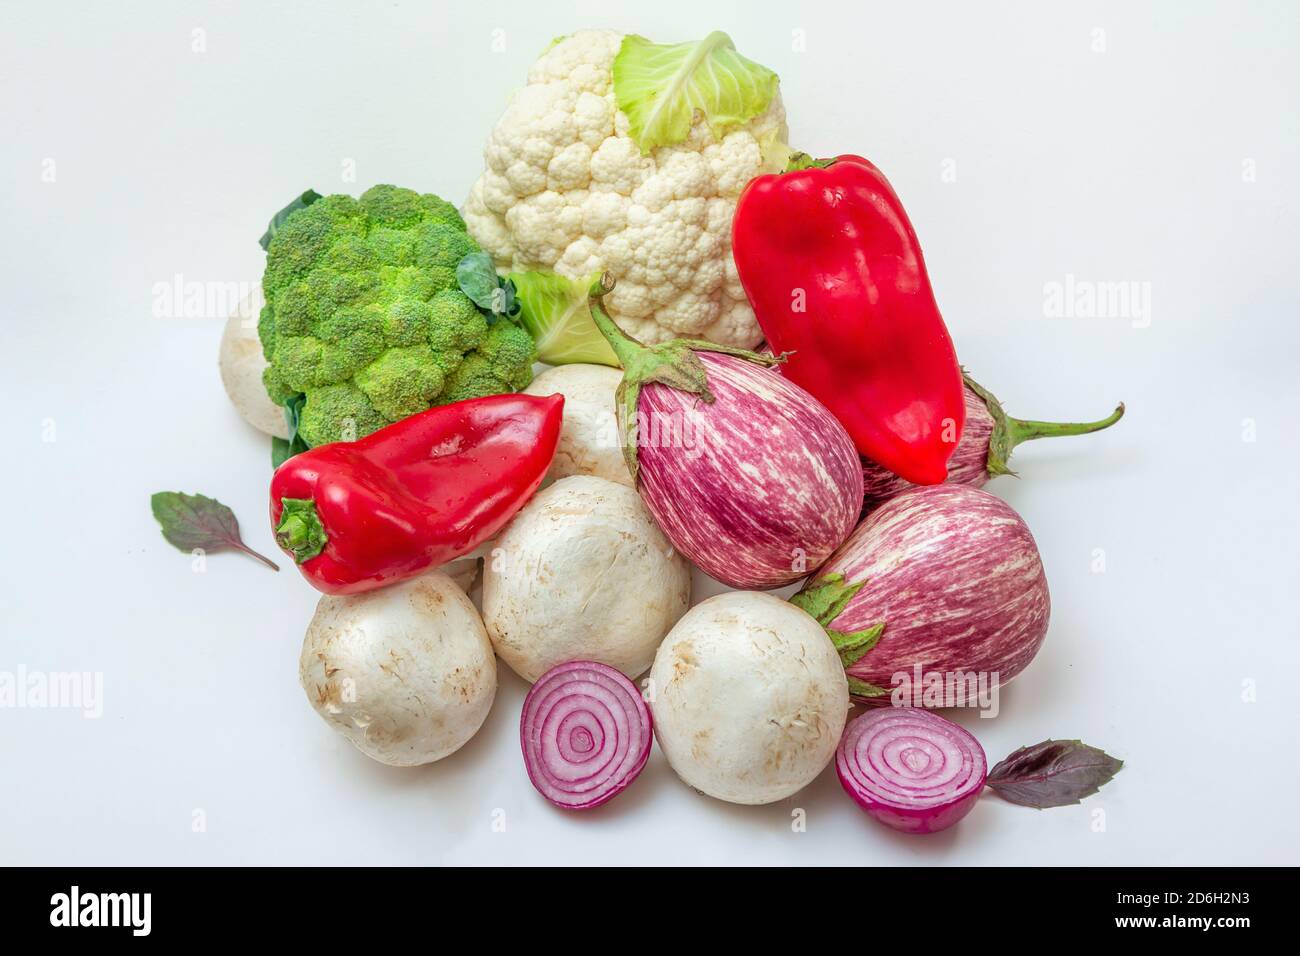 Vegetables and mushrooms on white background. Vegetarian dish ingredients - eggplants, champignons, paprika, onion, cauliflower and broccoli. Healthy Stock Photo